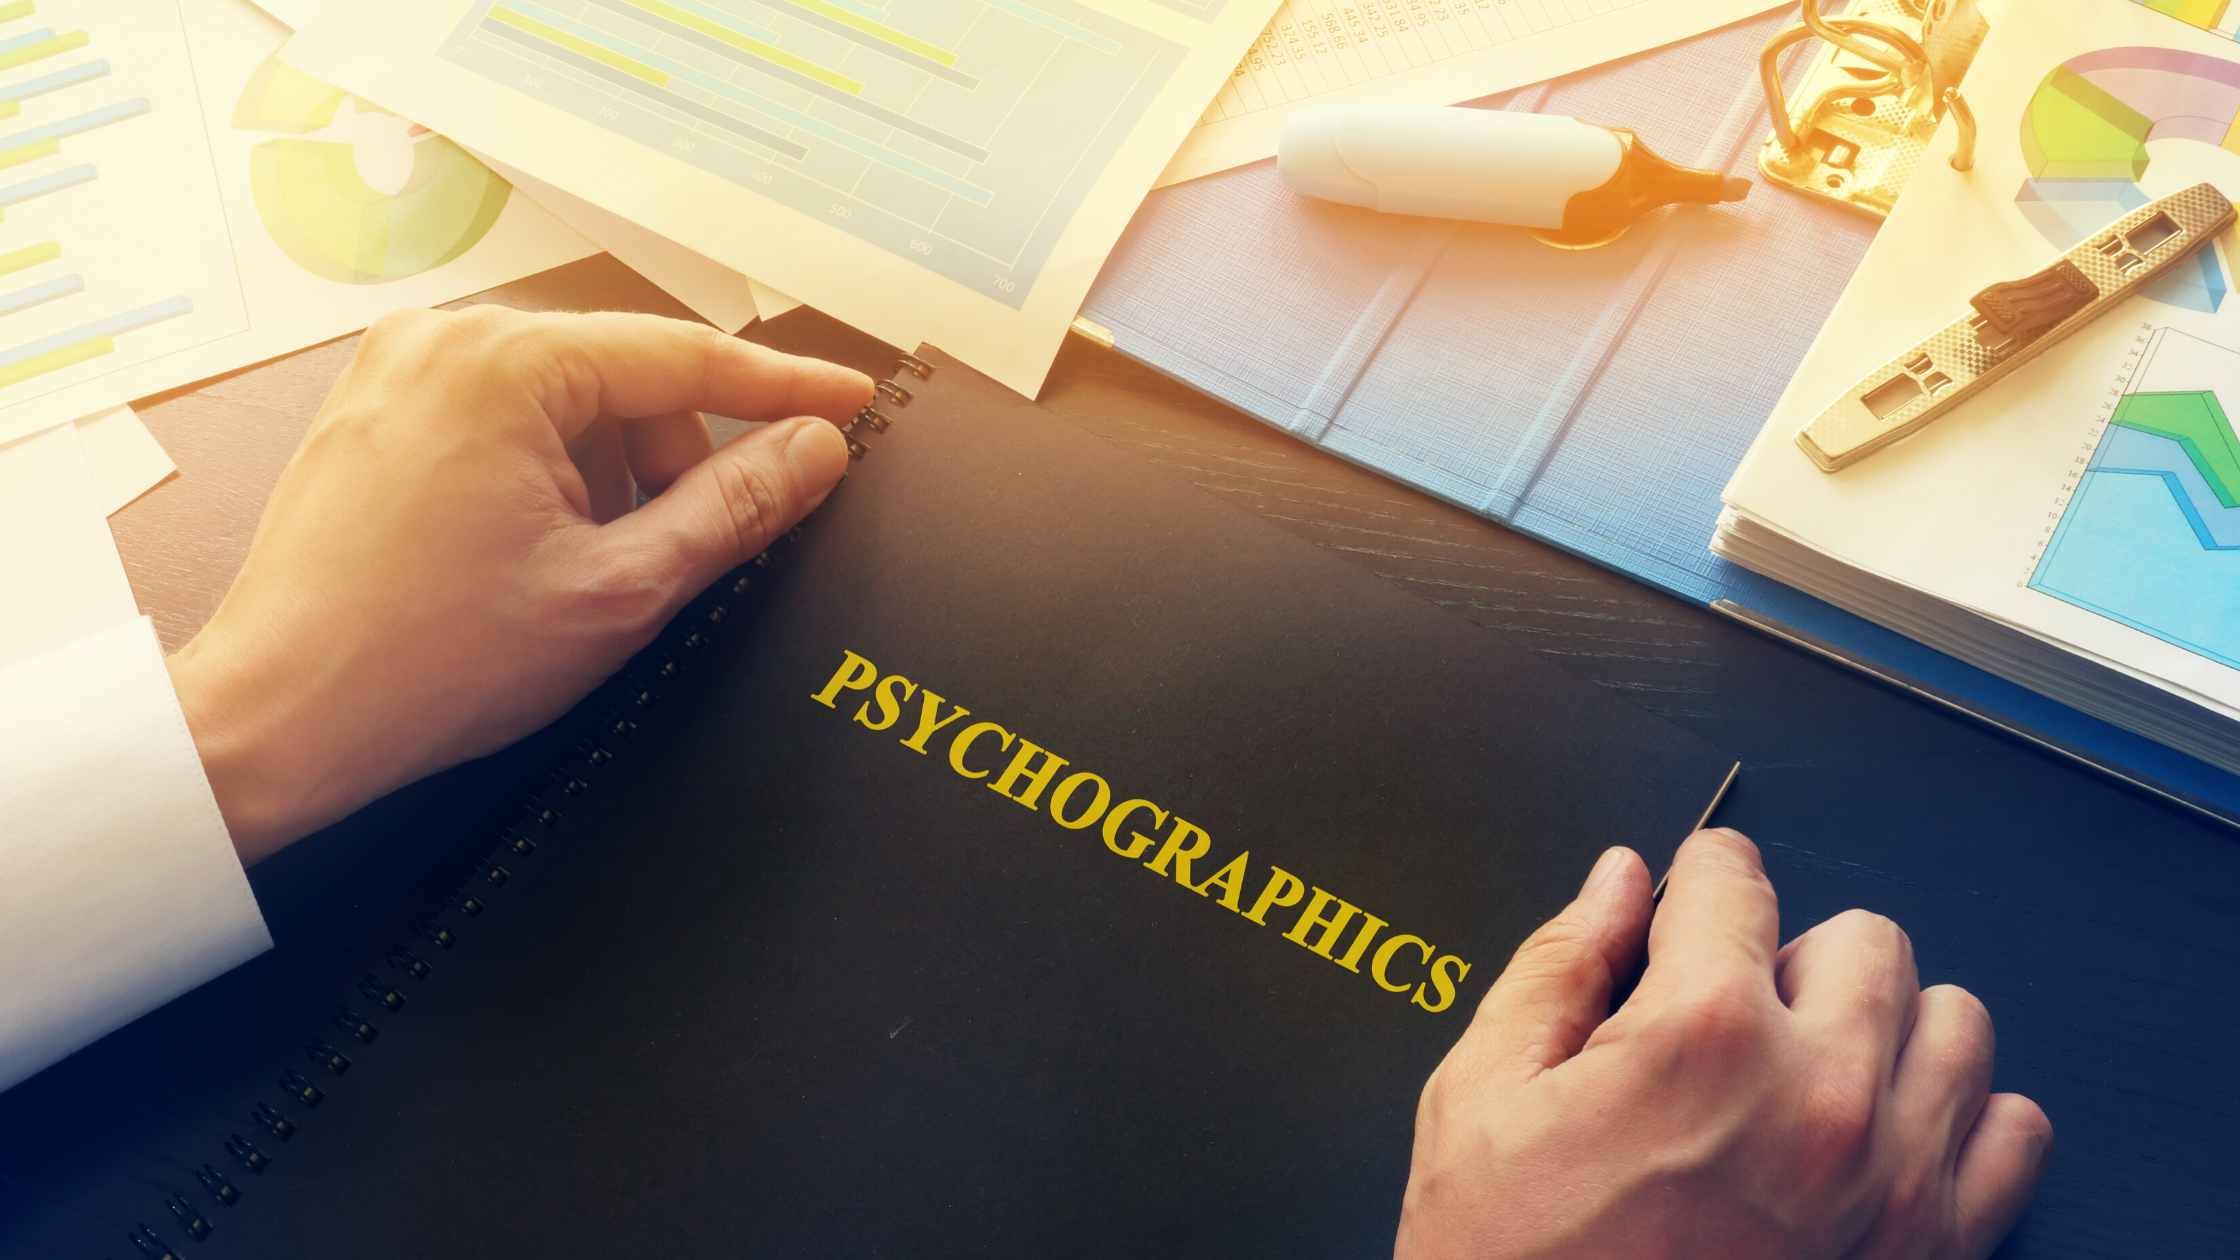 Marketing Psychographics for different Generations